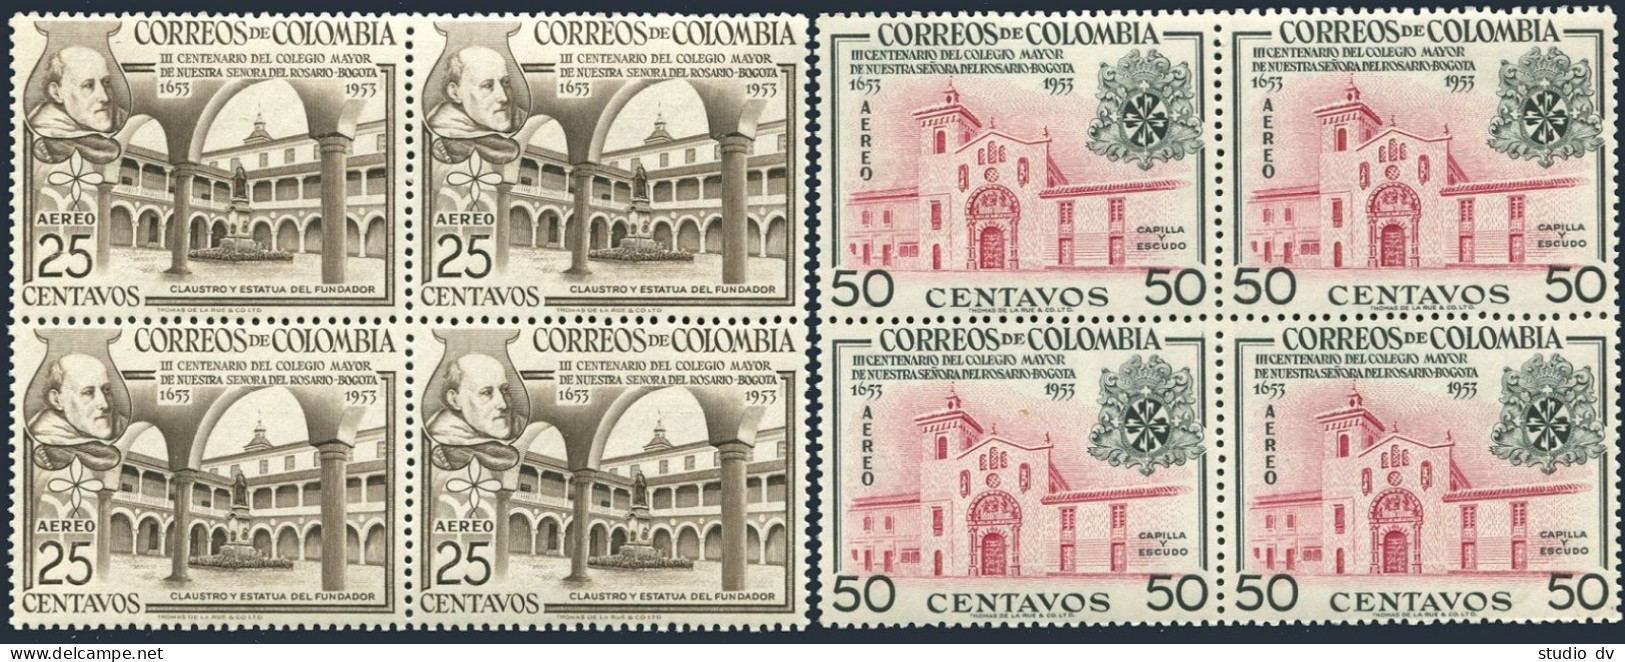 Colombia C265-C266 Blocks/4,MNH.Mi 711-712. Senior College Of Our Lady.1954. - Colombia